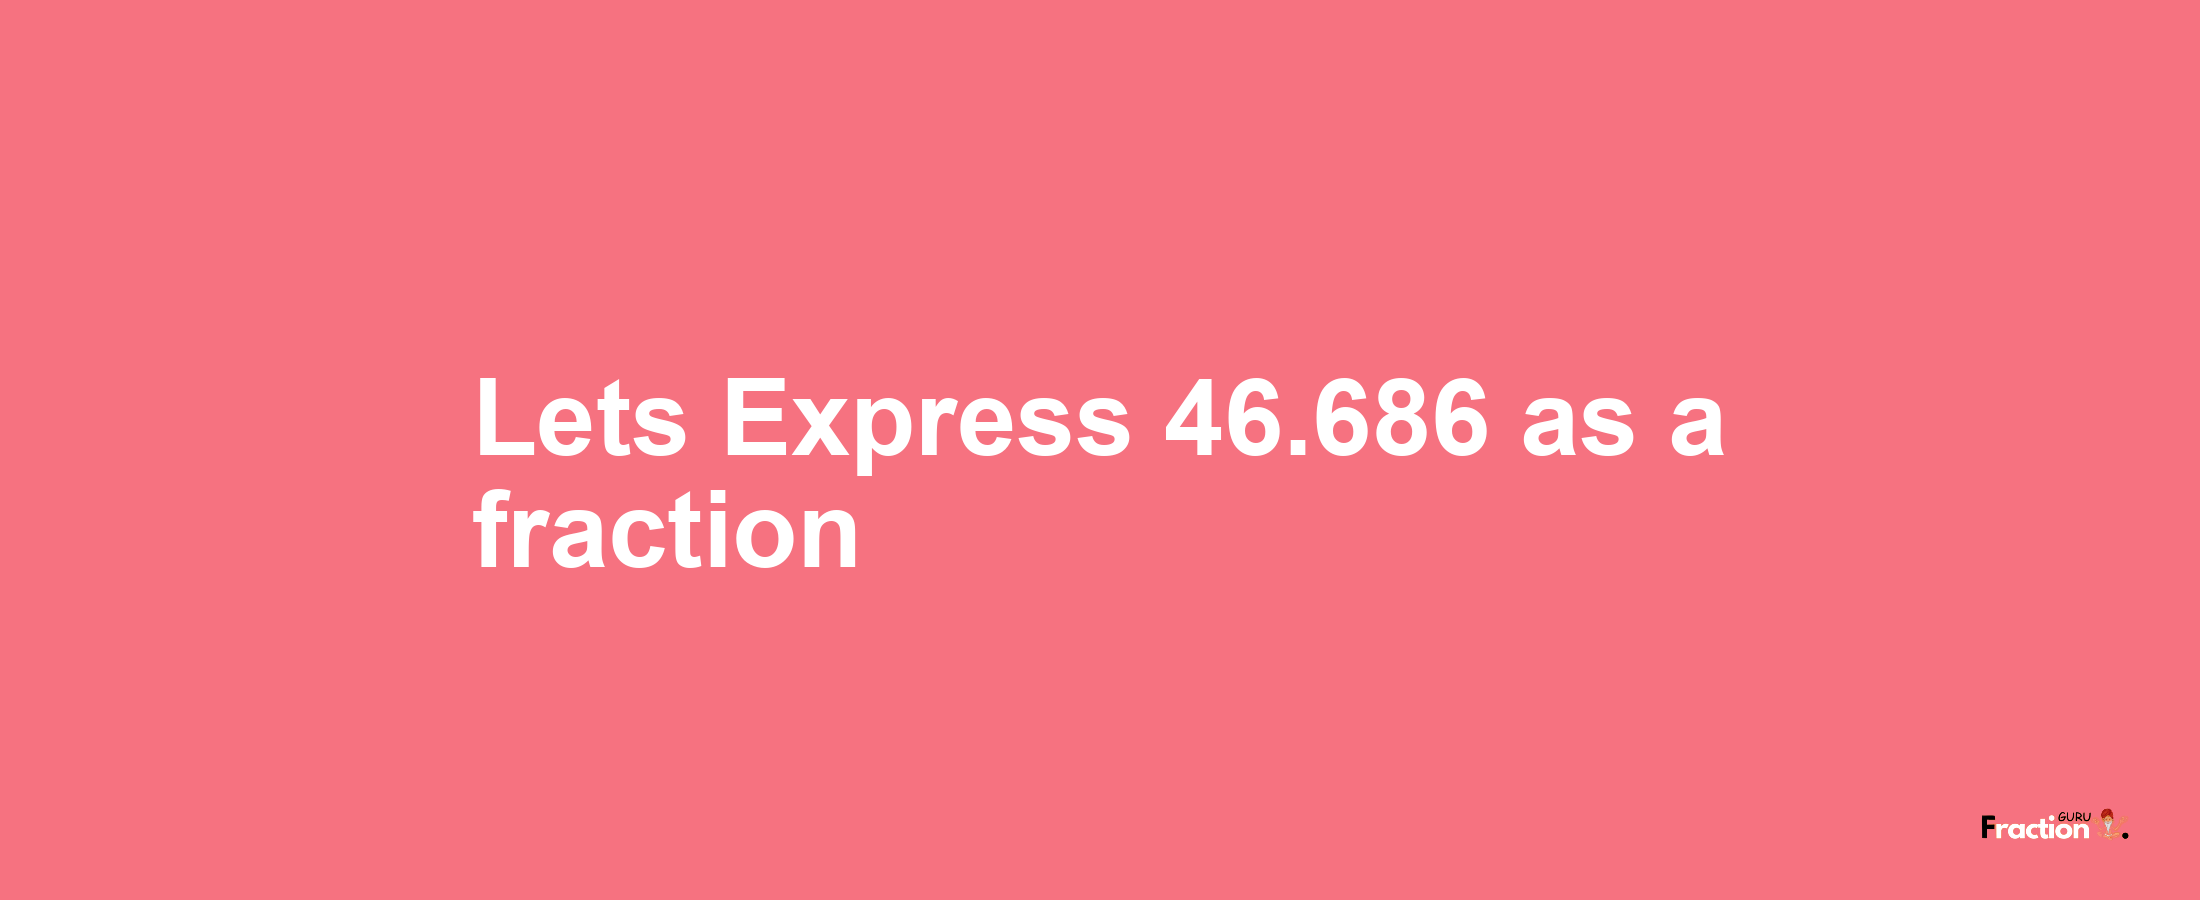 Lets Express 46.686 as afraction